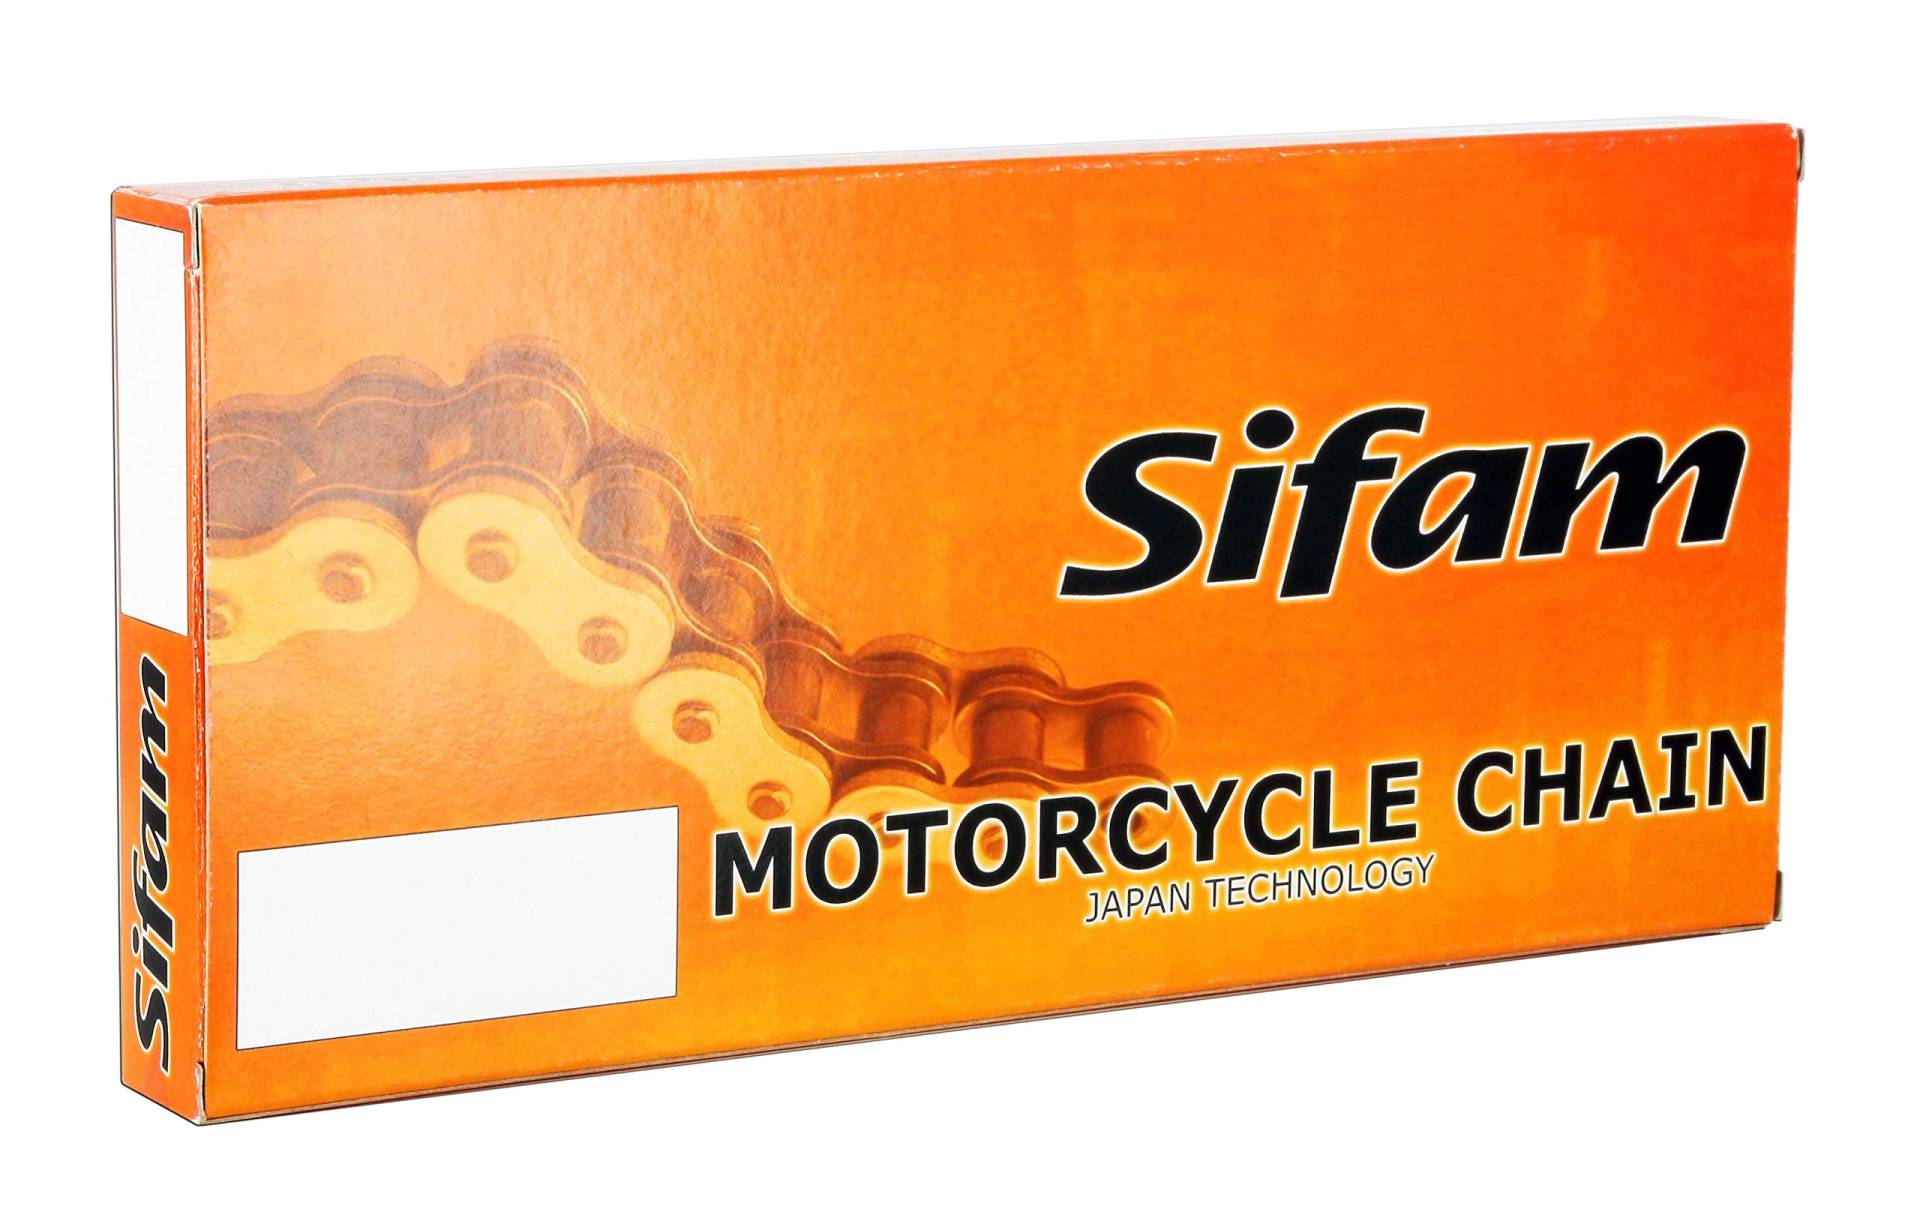 KETTEN SIFAM HYPER O RING TEILUNG 428 136 LINKS von Sifam